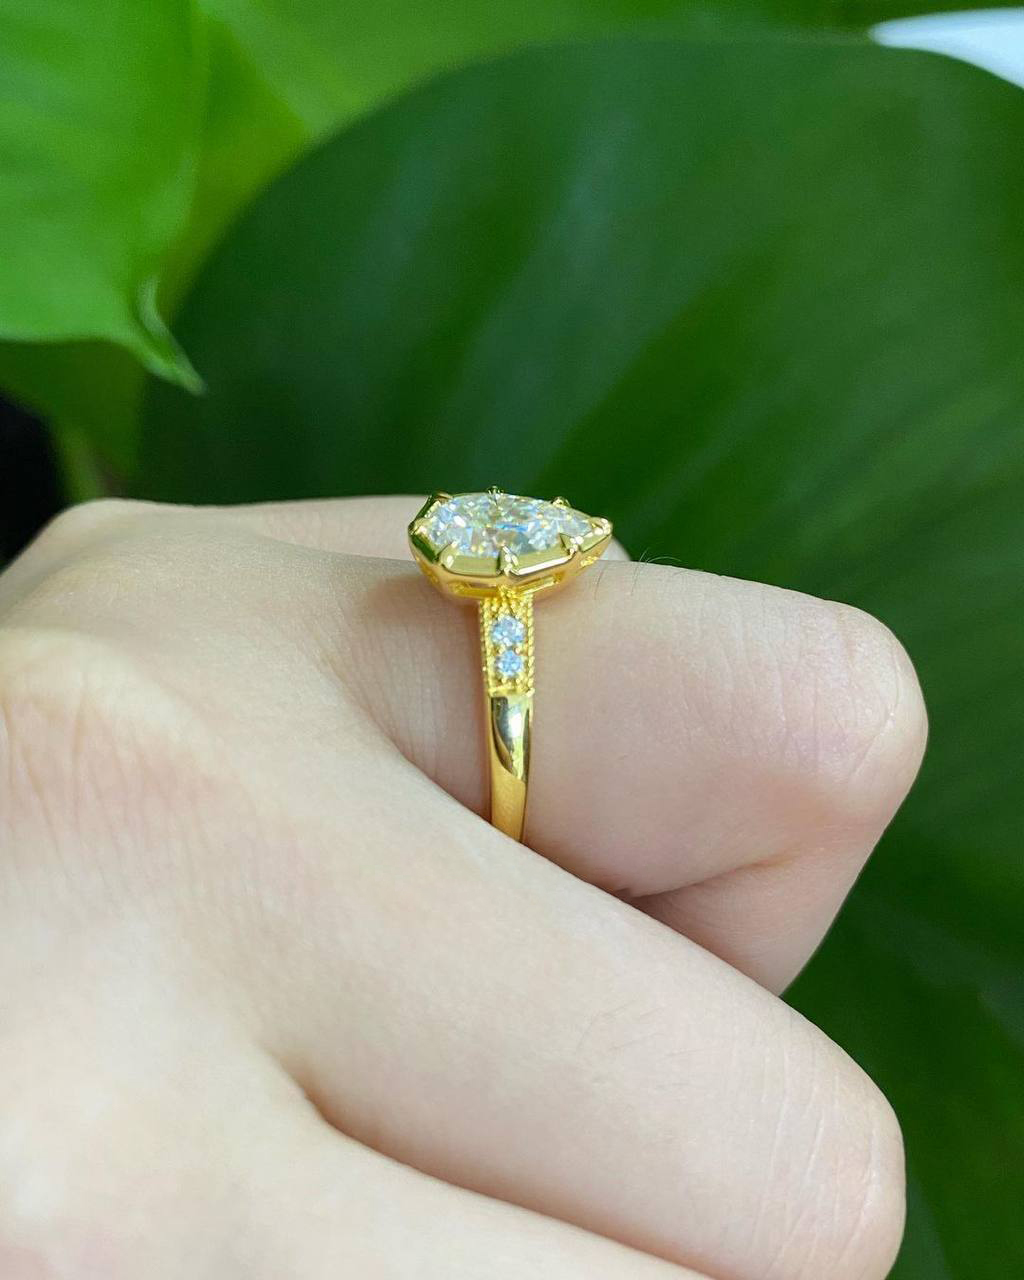 2 Ct Pear Shaped CZ Engagement Ring, Pear Solitaire Ring, Wedding,Bridal Ring Set, Solid White/Yellow/Rose Gold, Minimalist Dainty Gift Ring | Save 33% - Rajasthan Living 8